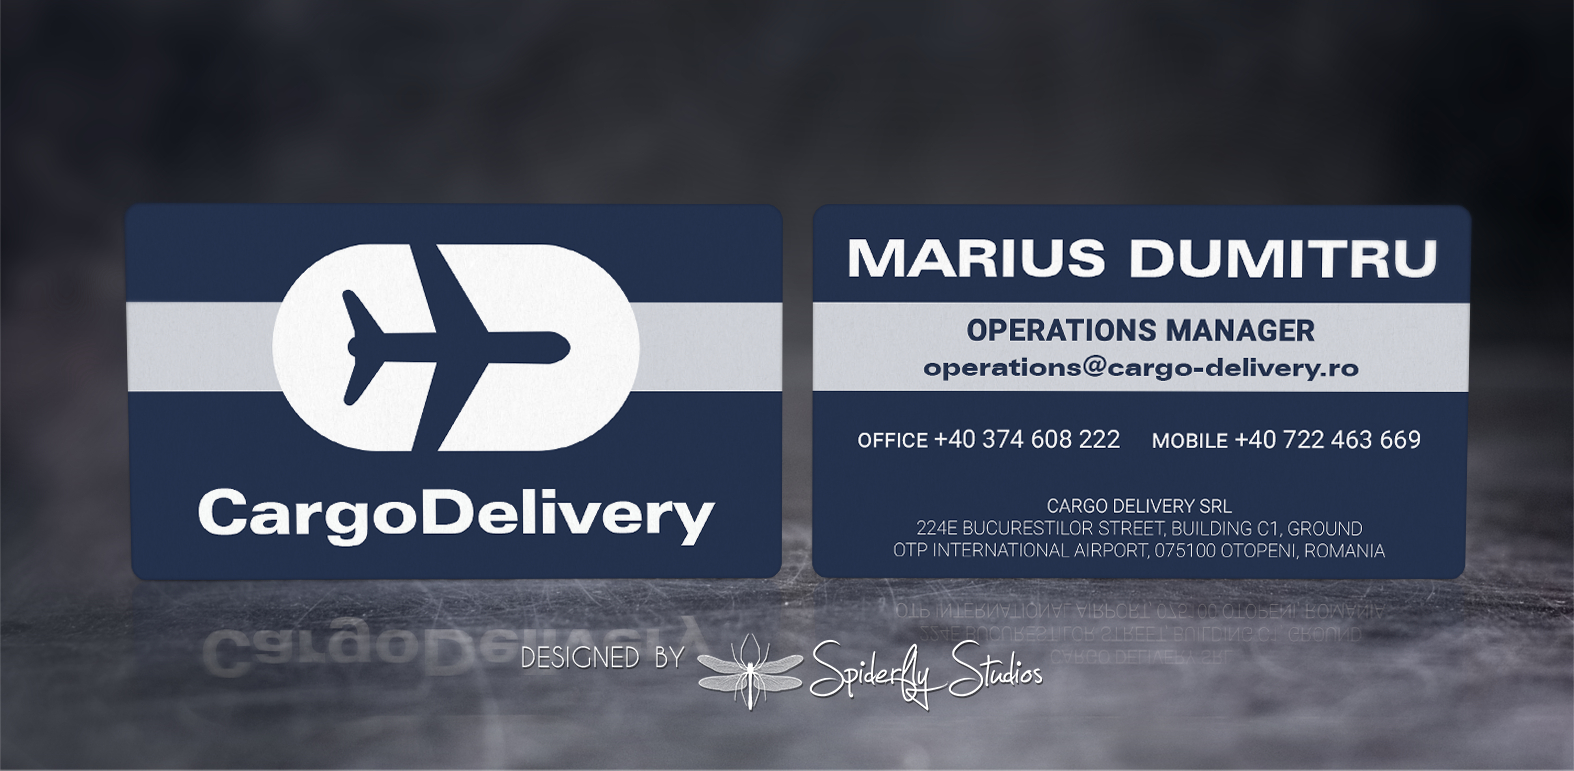 Cargo Delivery - Business Card Design